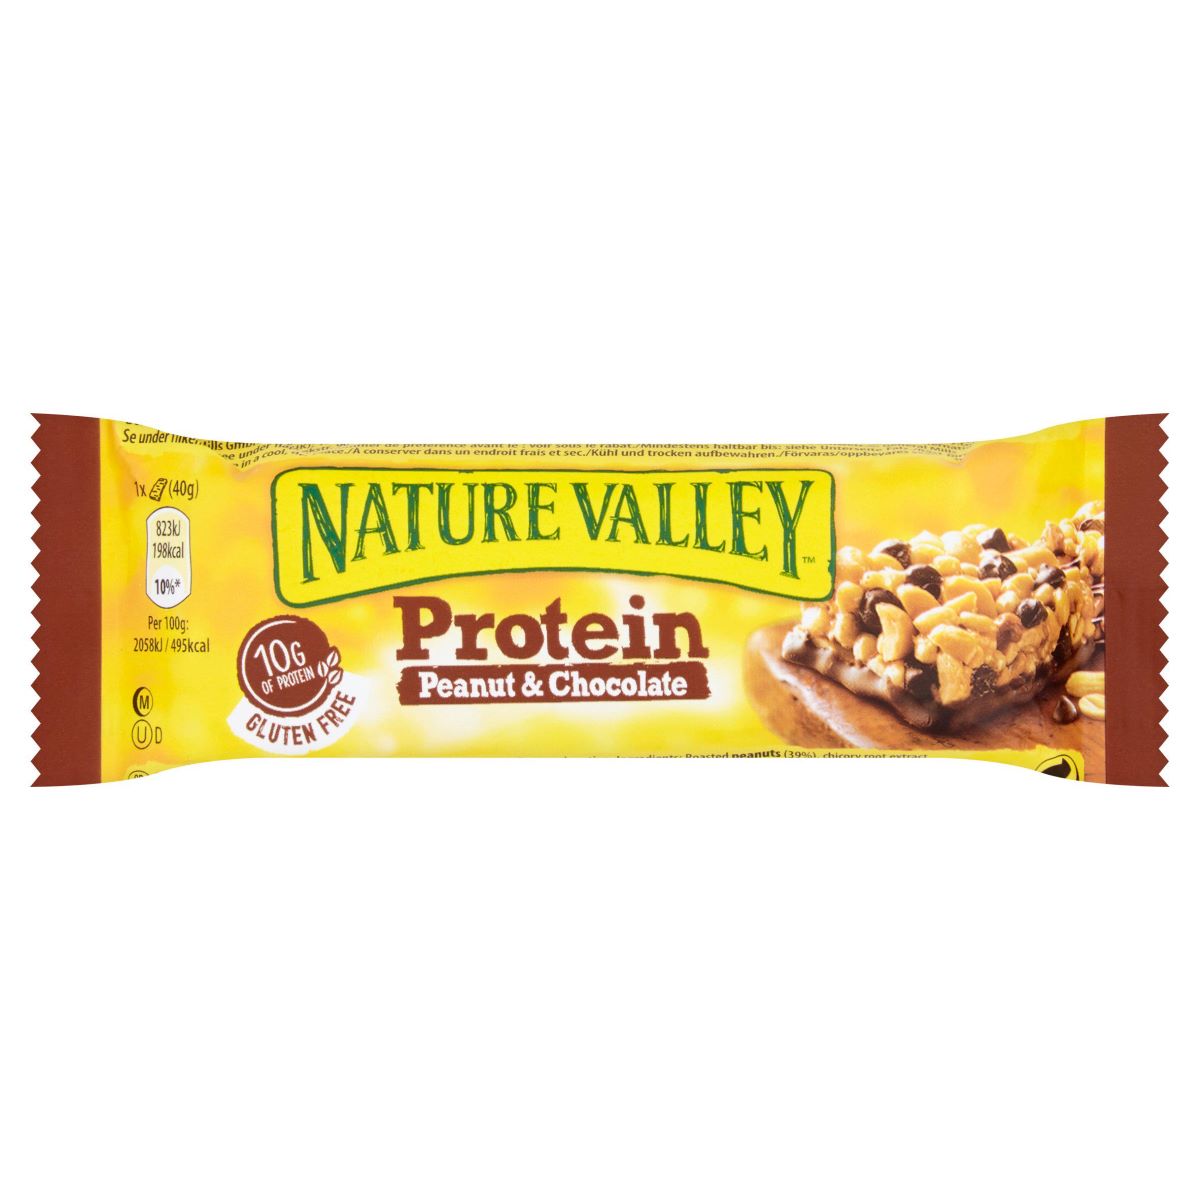 Nature Valley Protein Peanut and Chocolate Bar